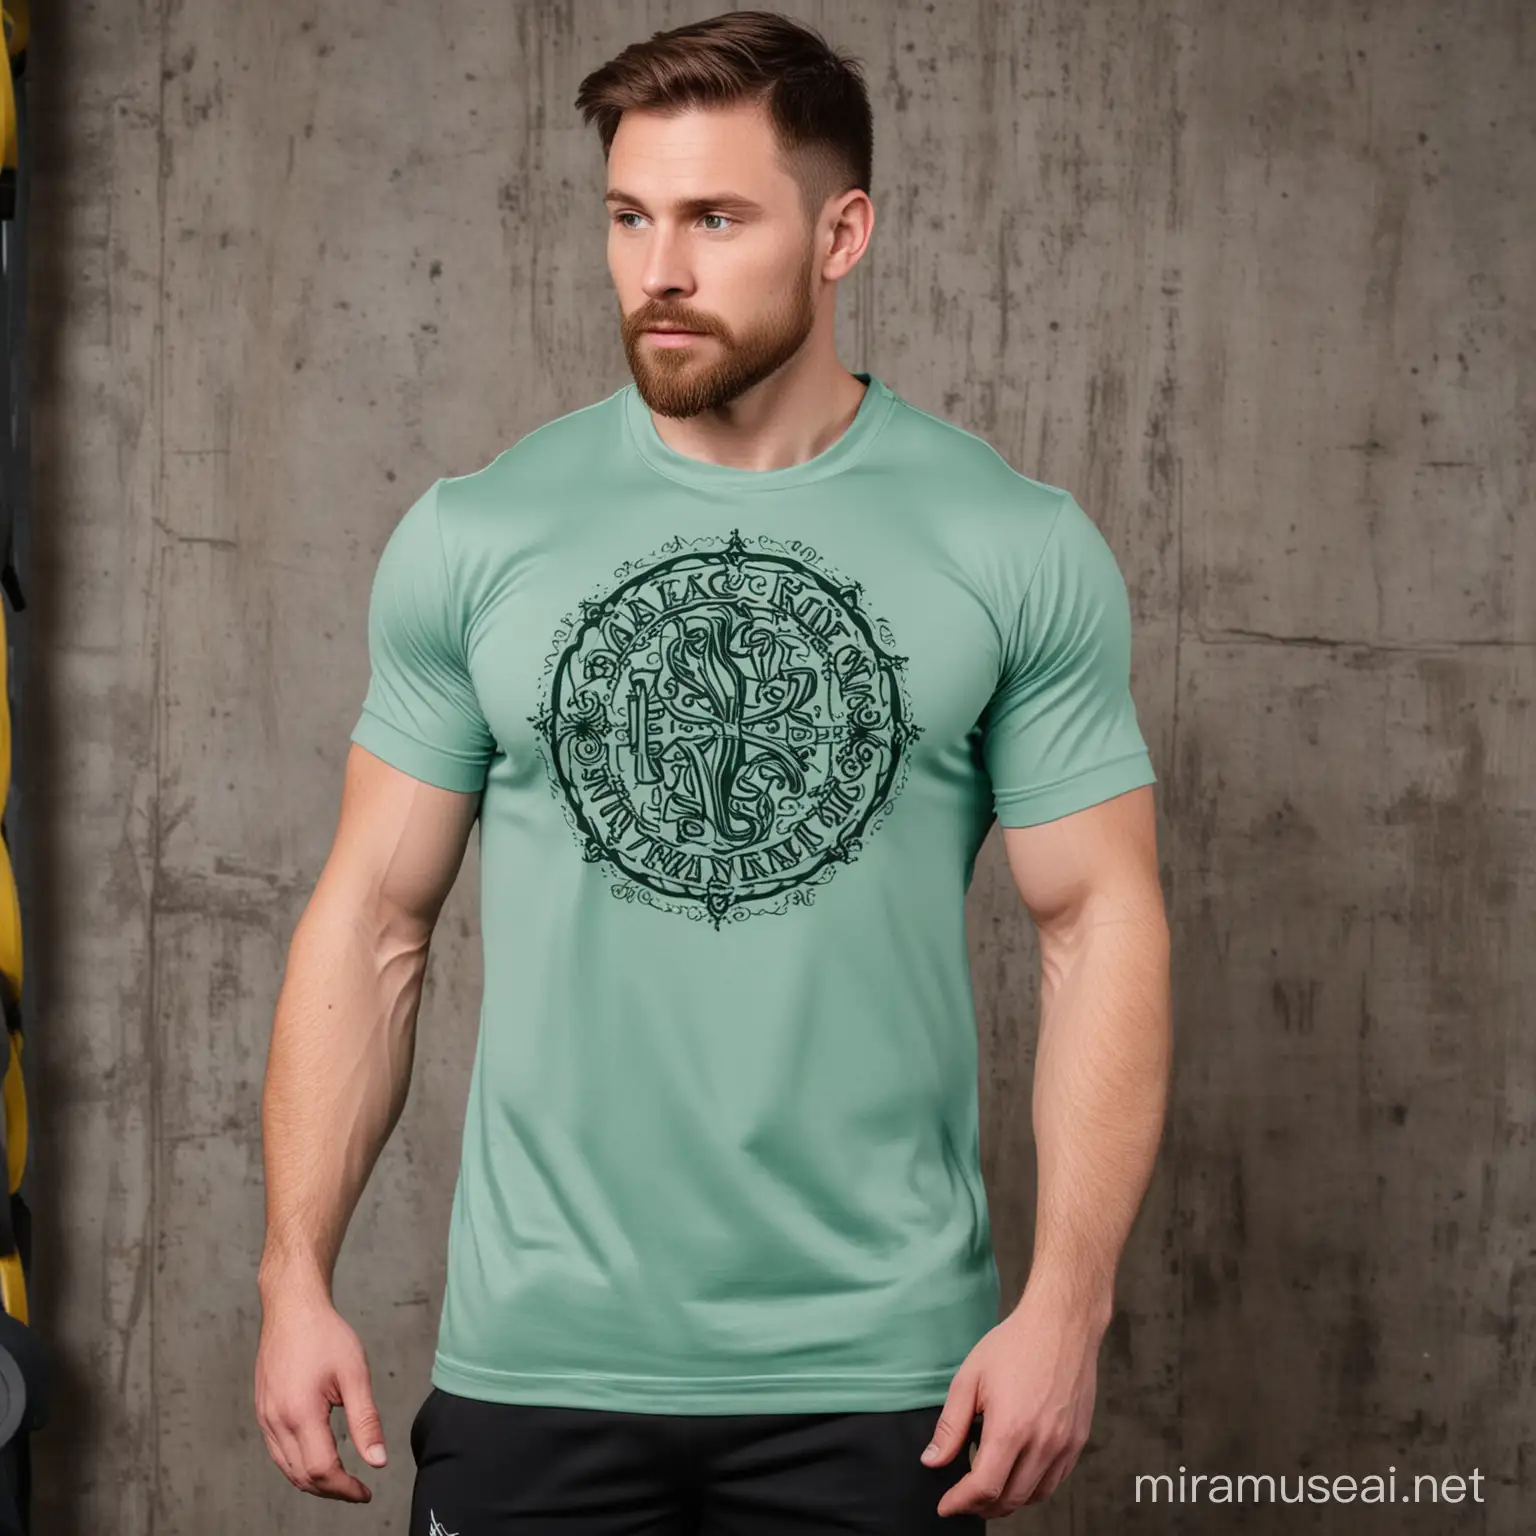 Vibrant GaelicInspired Gym Shirts for Dynamic Workouts